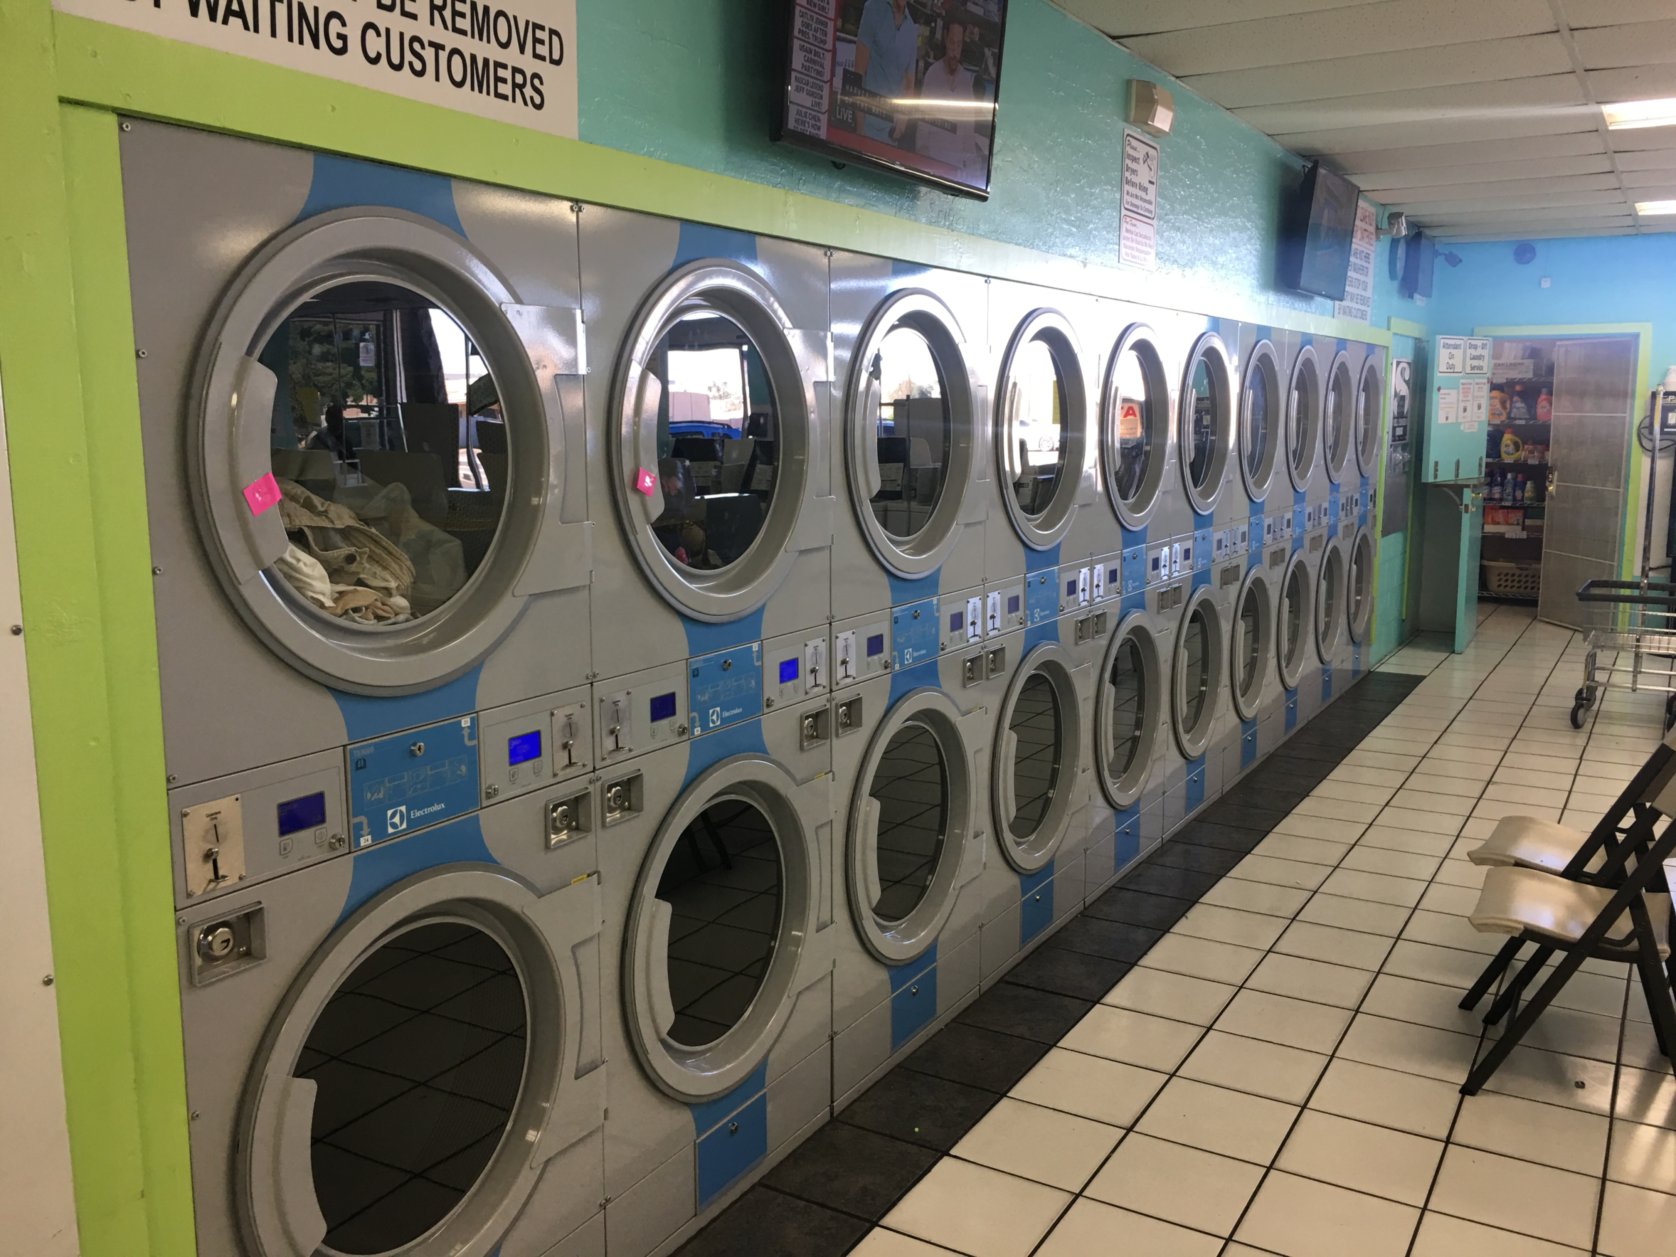 24-Hour Laundromat: Worth The Price Tag?